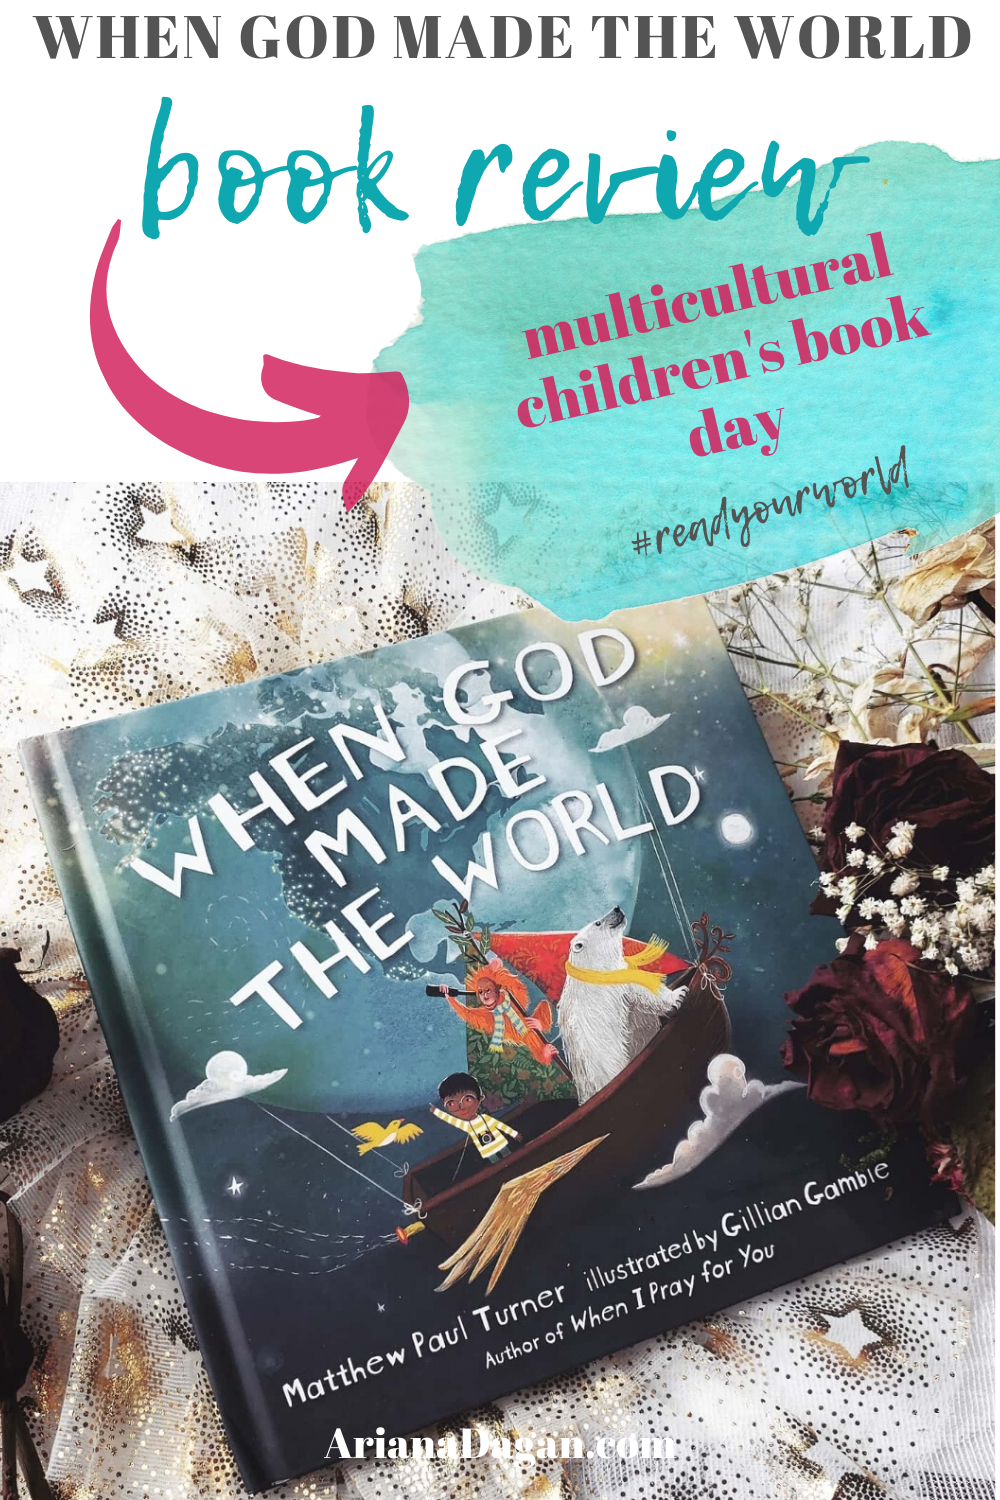 multicultural childrens book day, when god made the world, childrens diversity book review